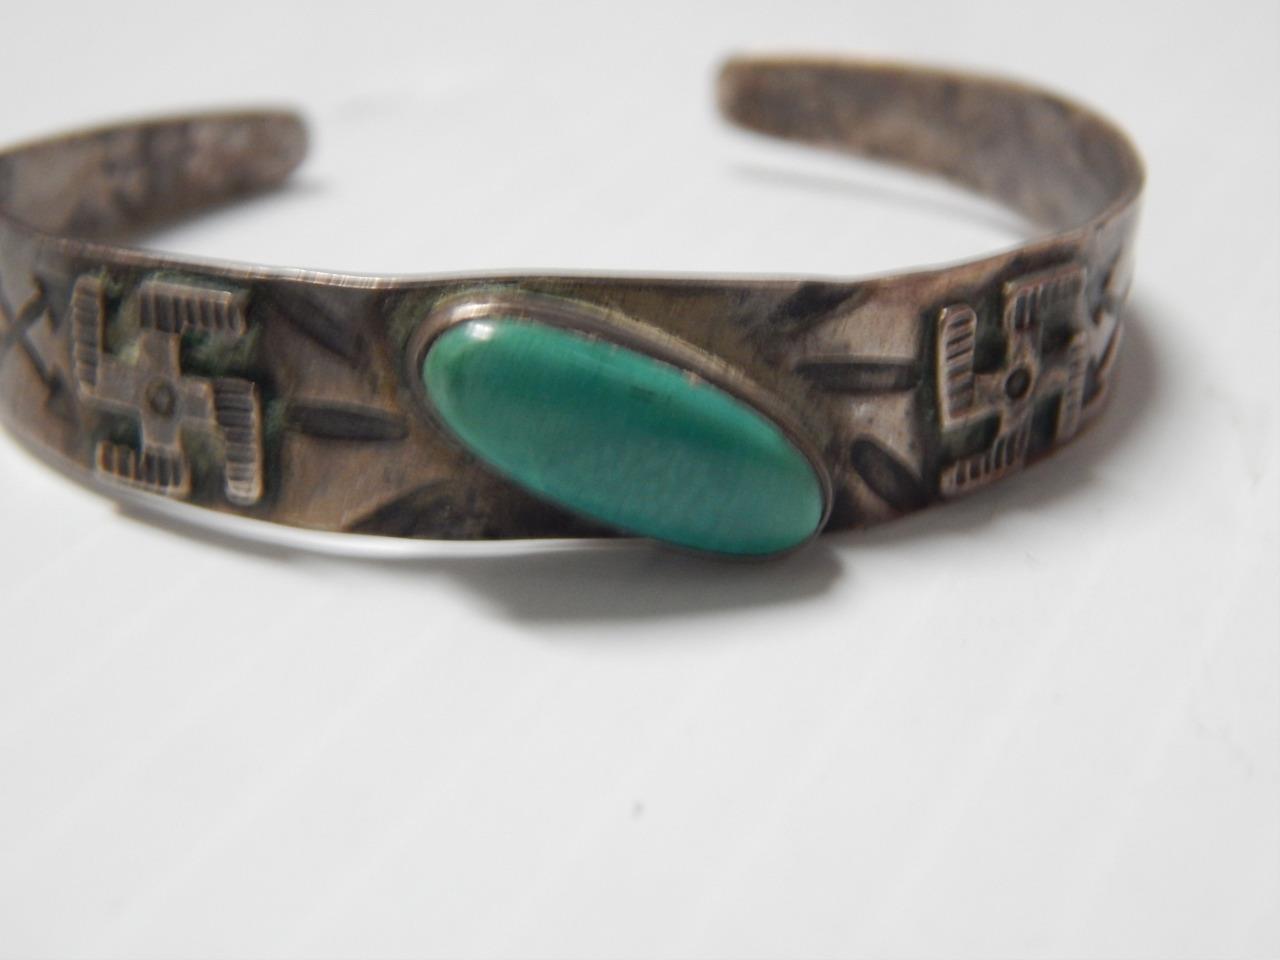 FINE OLD ANTIQUE NAVAJO INDIAN COIN TURQUOISE COIN SILVER WHIRLING LOGS BRACELET